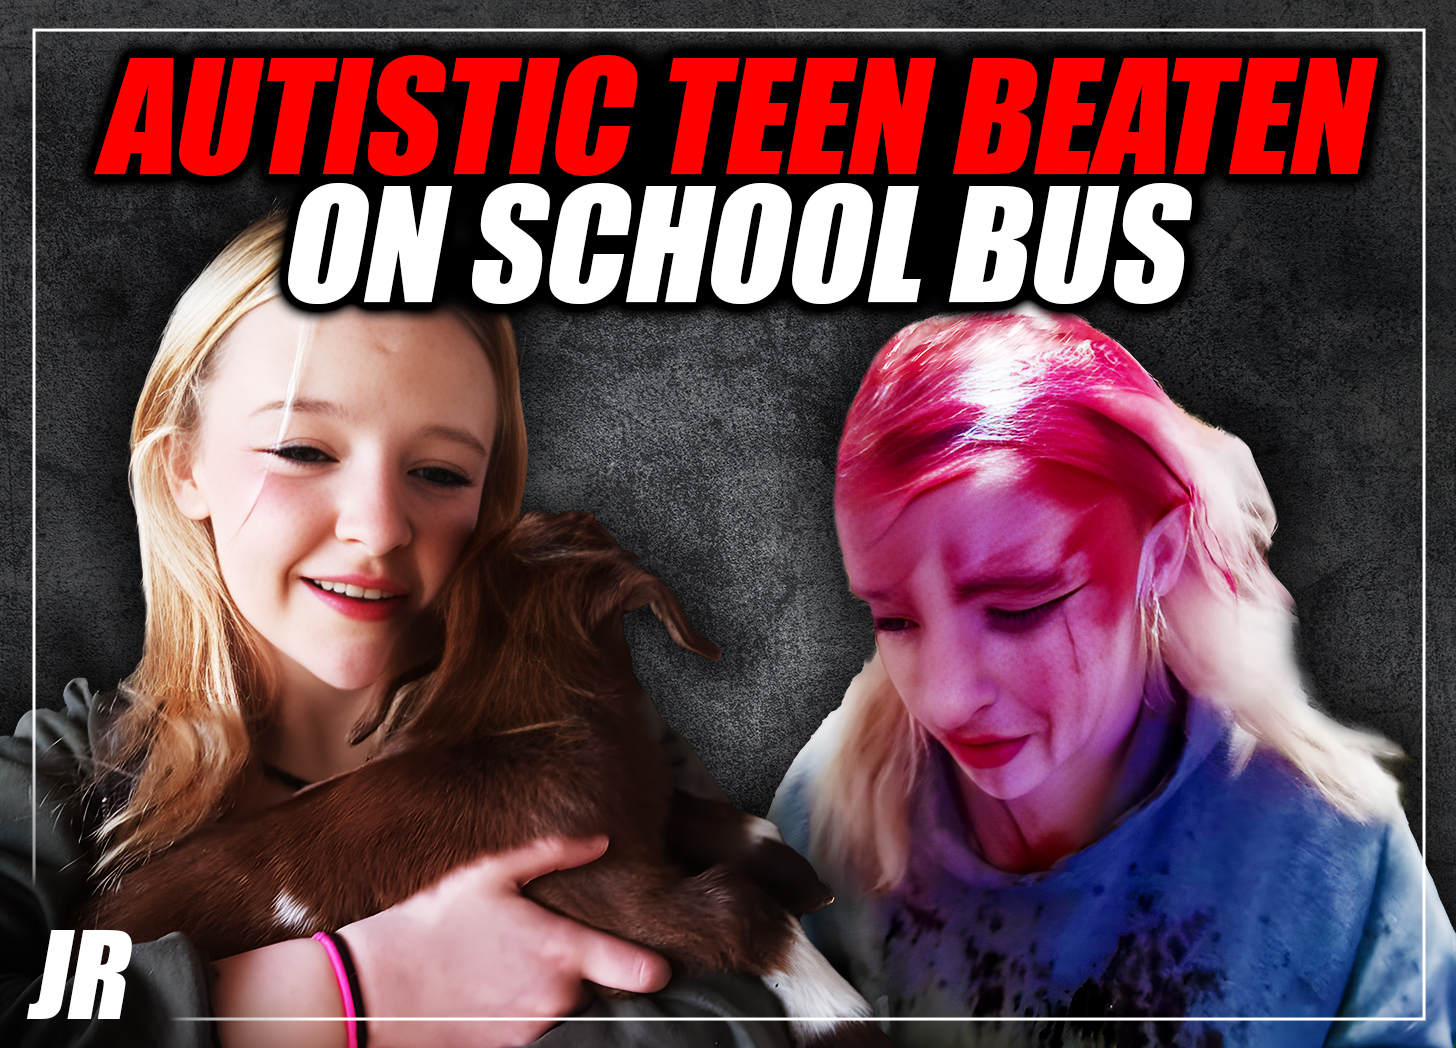 Exclusive: Teenage girl with autism bloodied in violent school bus ambush